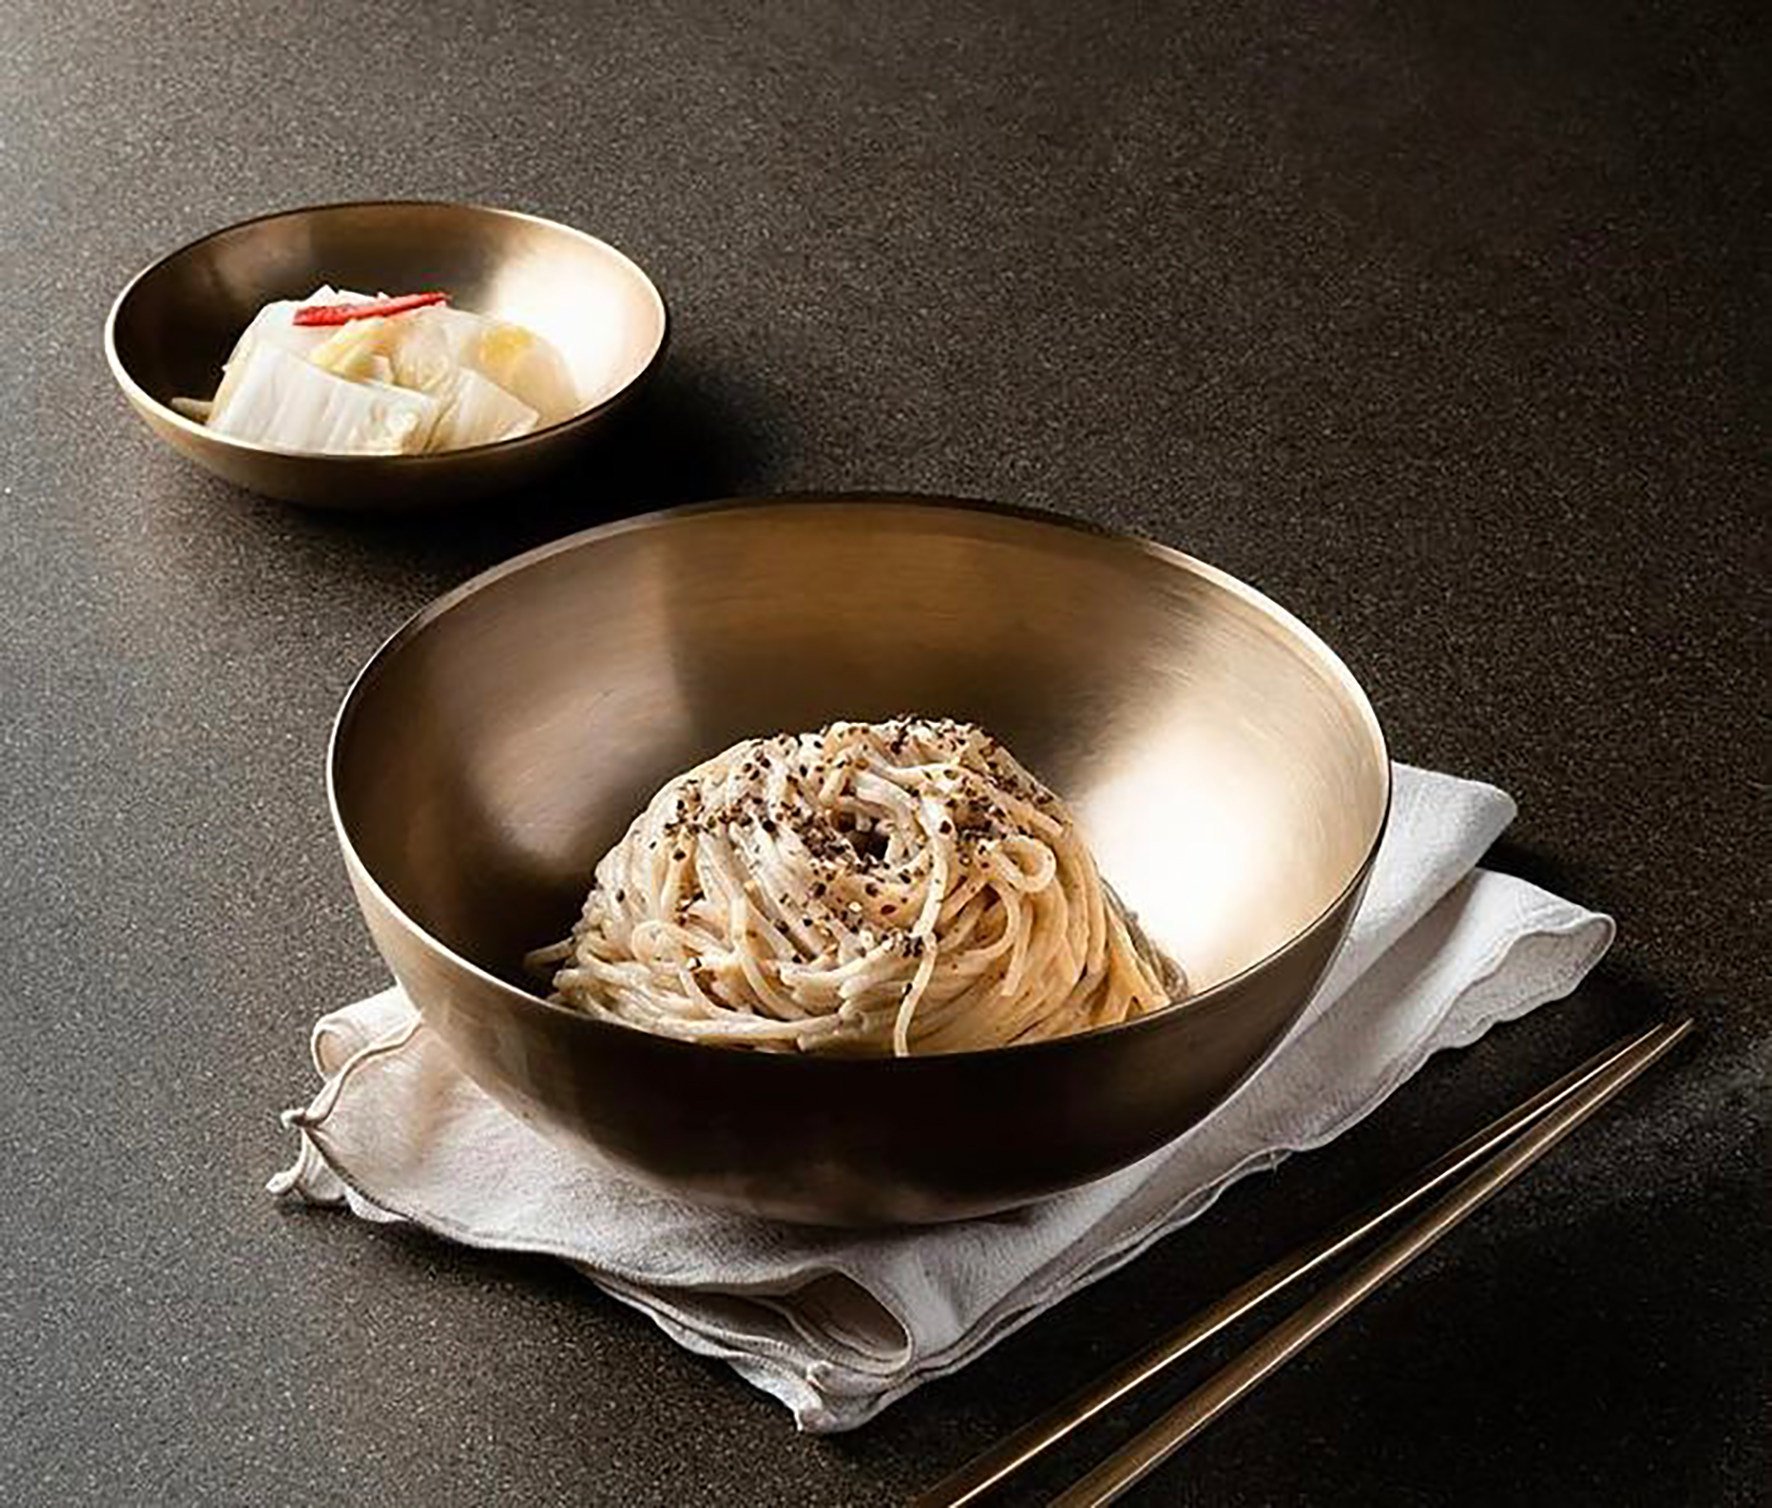 South Korean chef Kim Do-yun, of one-Michelin-star Yun Seoul, has a passion for noodles and has made it his mission to create varieties free from additives and that preserve a natural fragrance. Photo: Yun Seoul